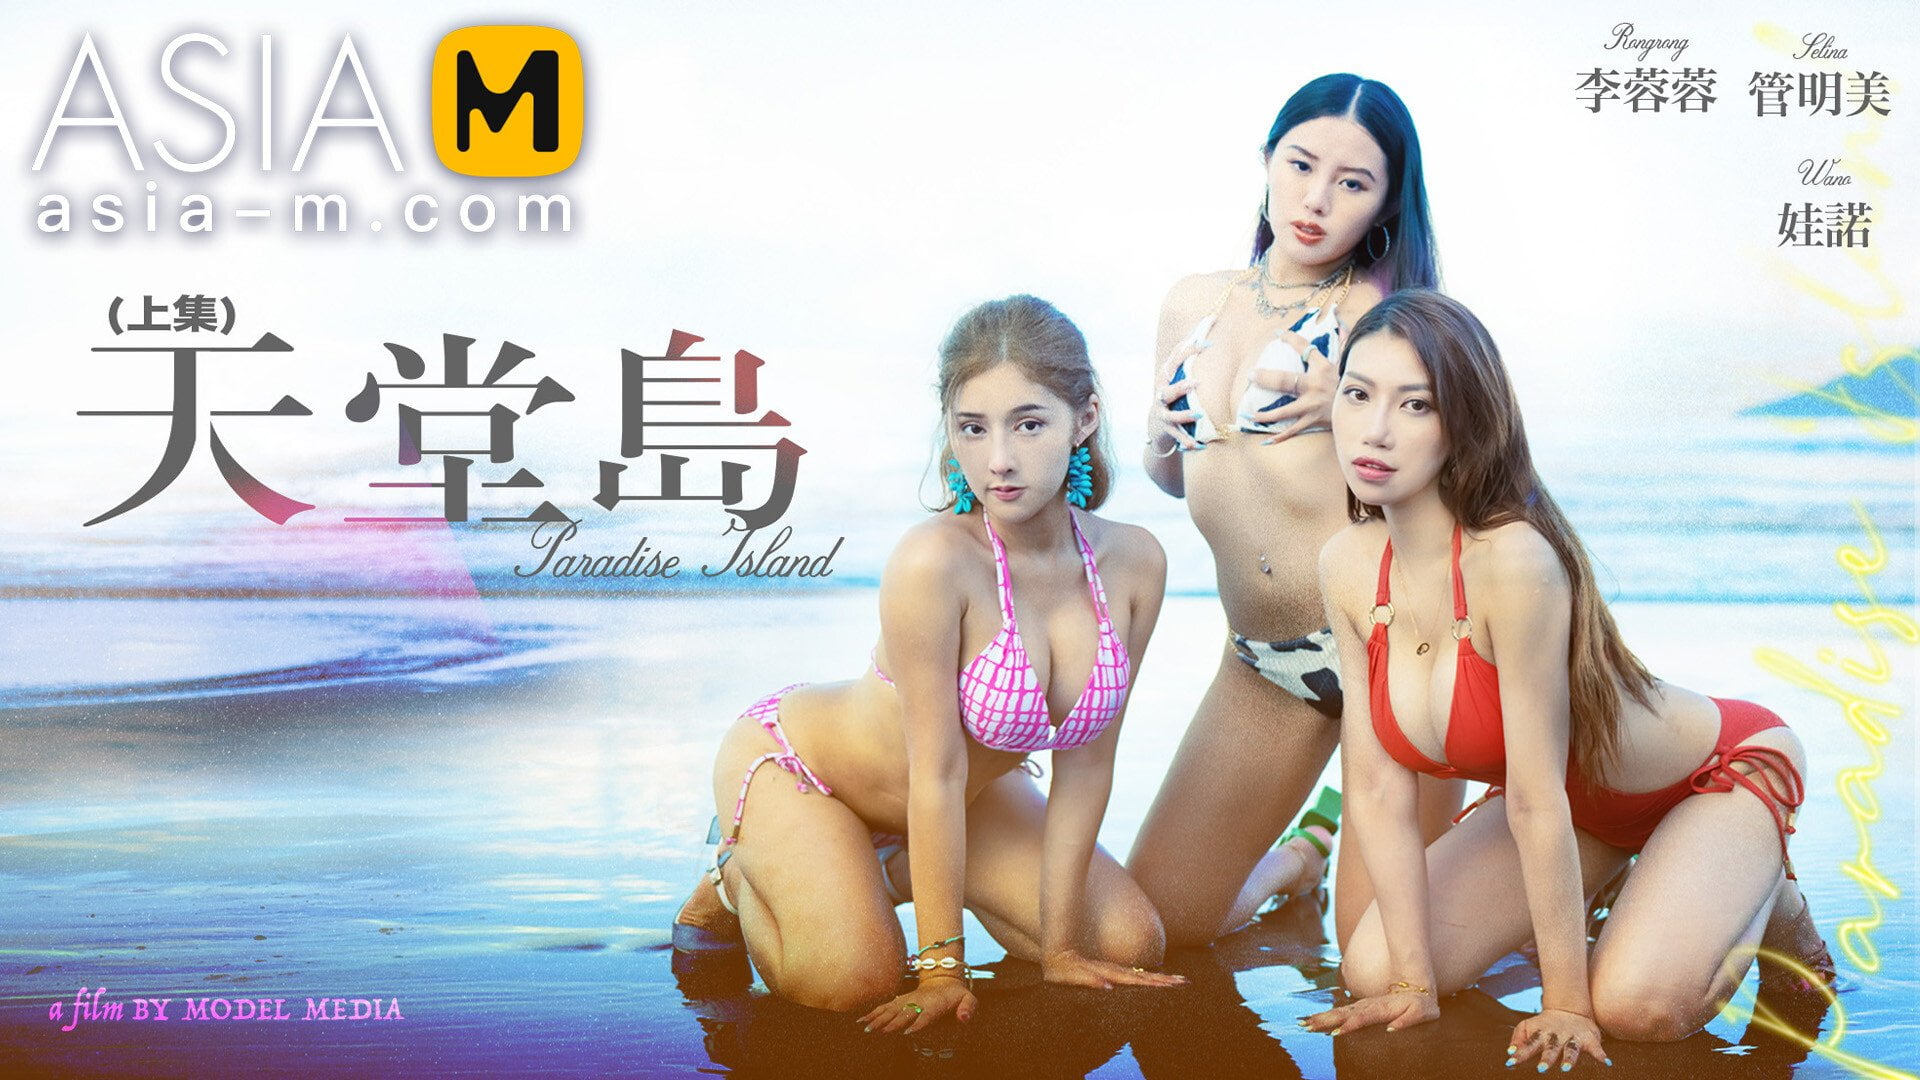 Asia-M &#8211; Wa Nuo, Li Rong Rong And Guan Ming Mei &#8211; Paradise Island MDL-0007-1 / 天堂岛-上集 MDL-0007-1, PervTube.net